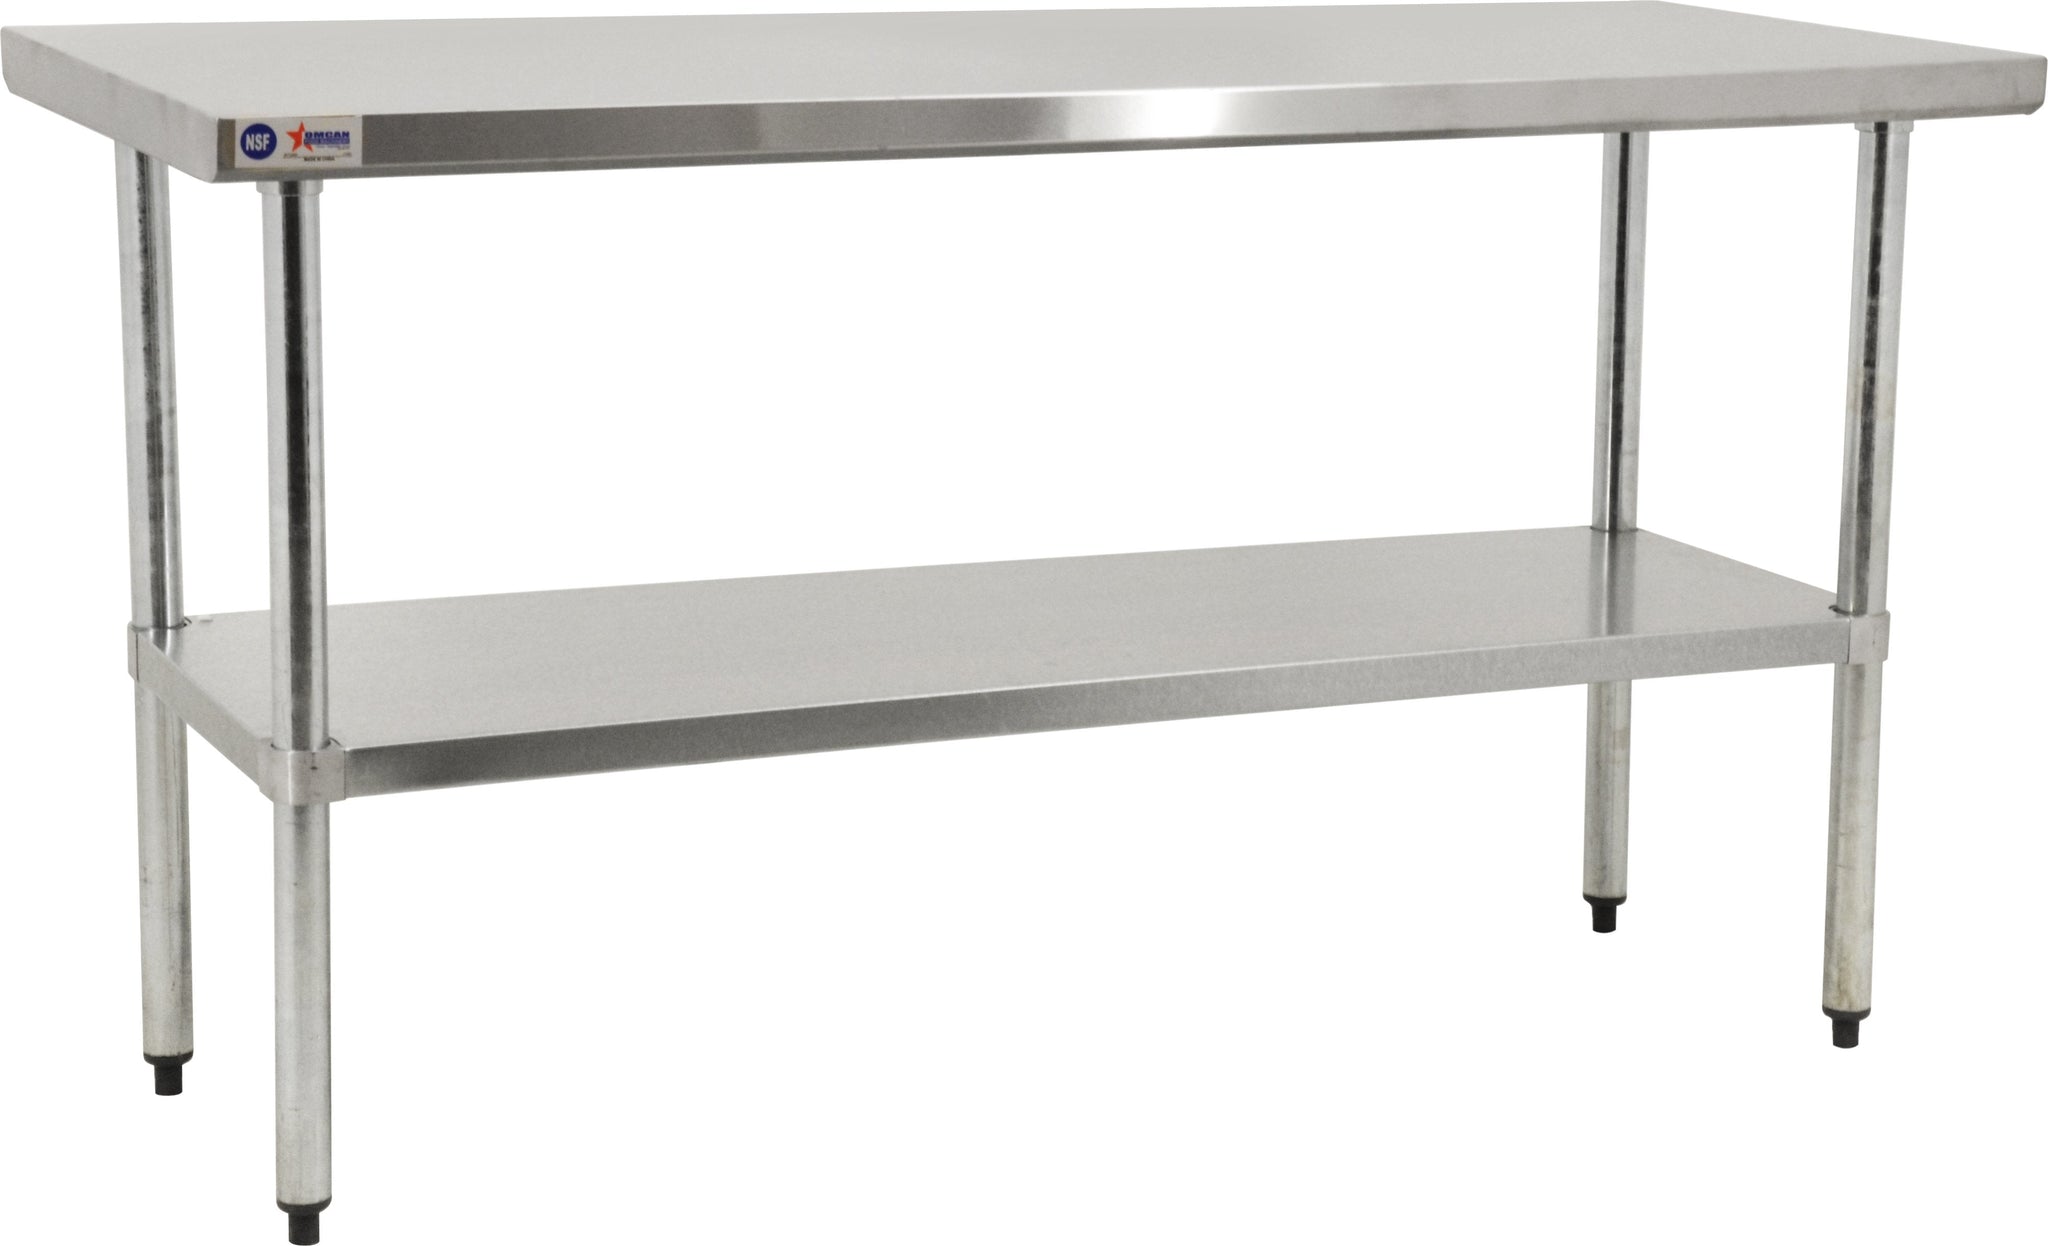 Omcan - 30” x 60” Stainless Steel Work Table - 19145